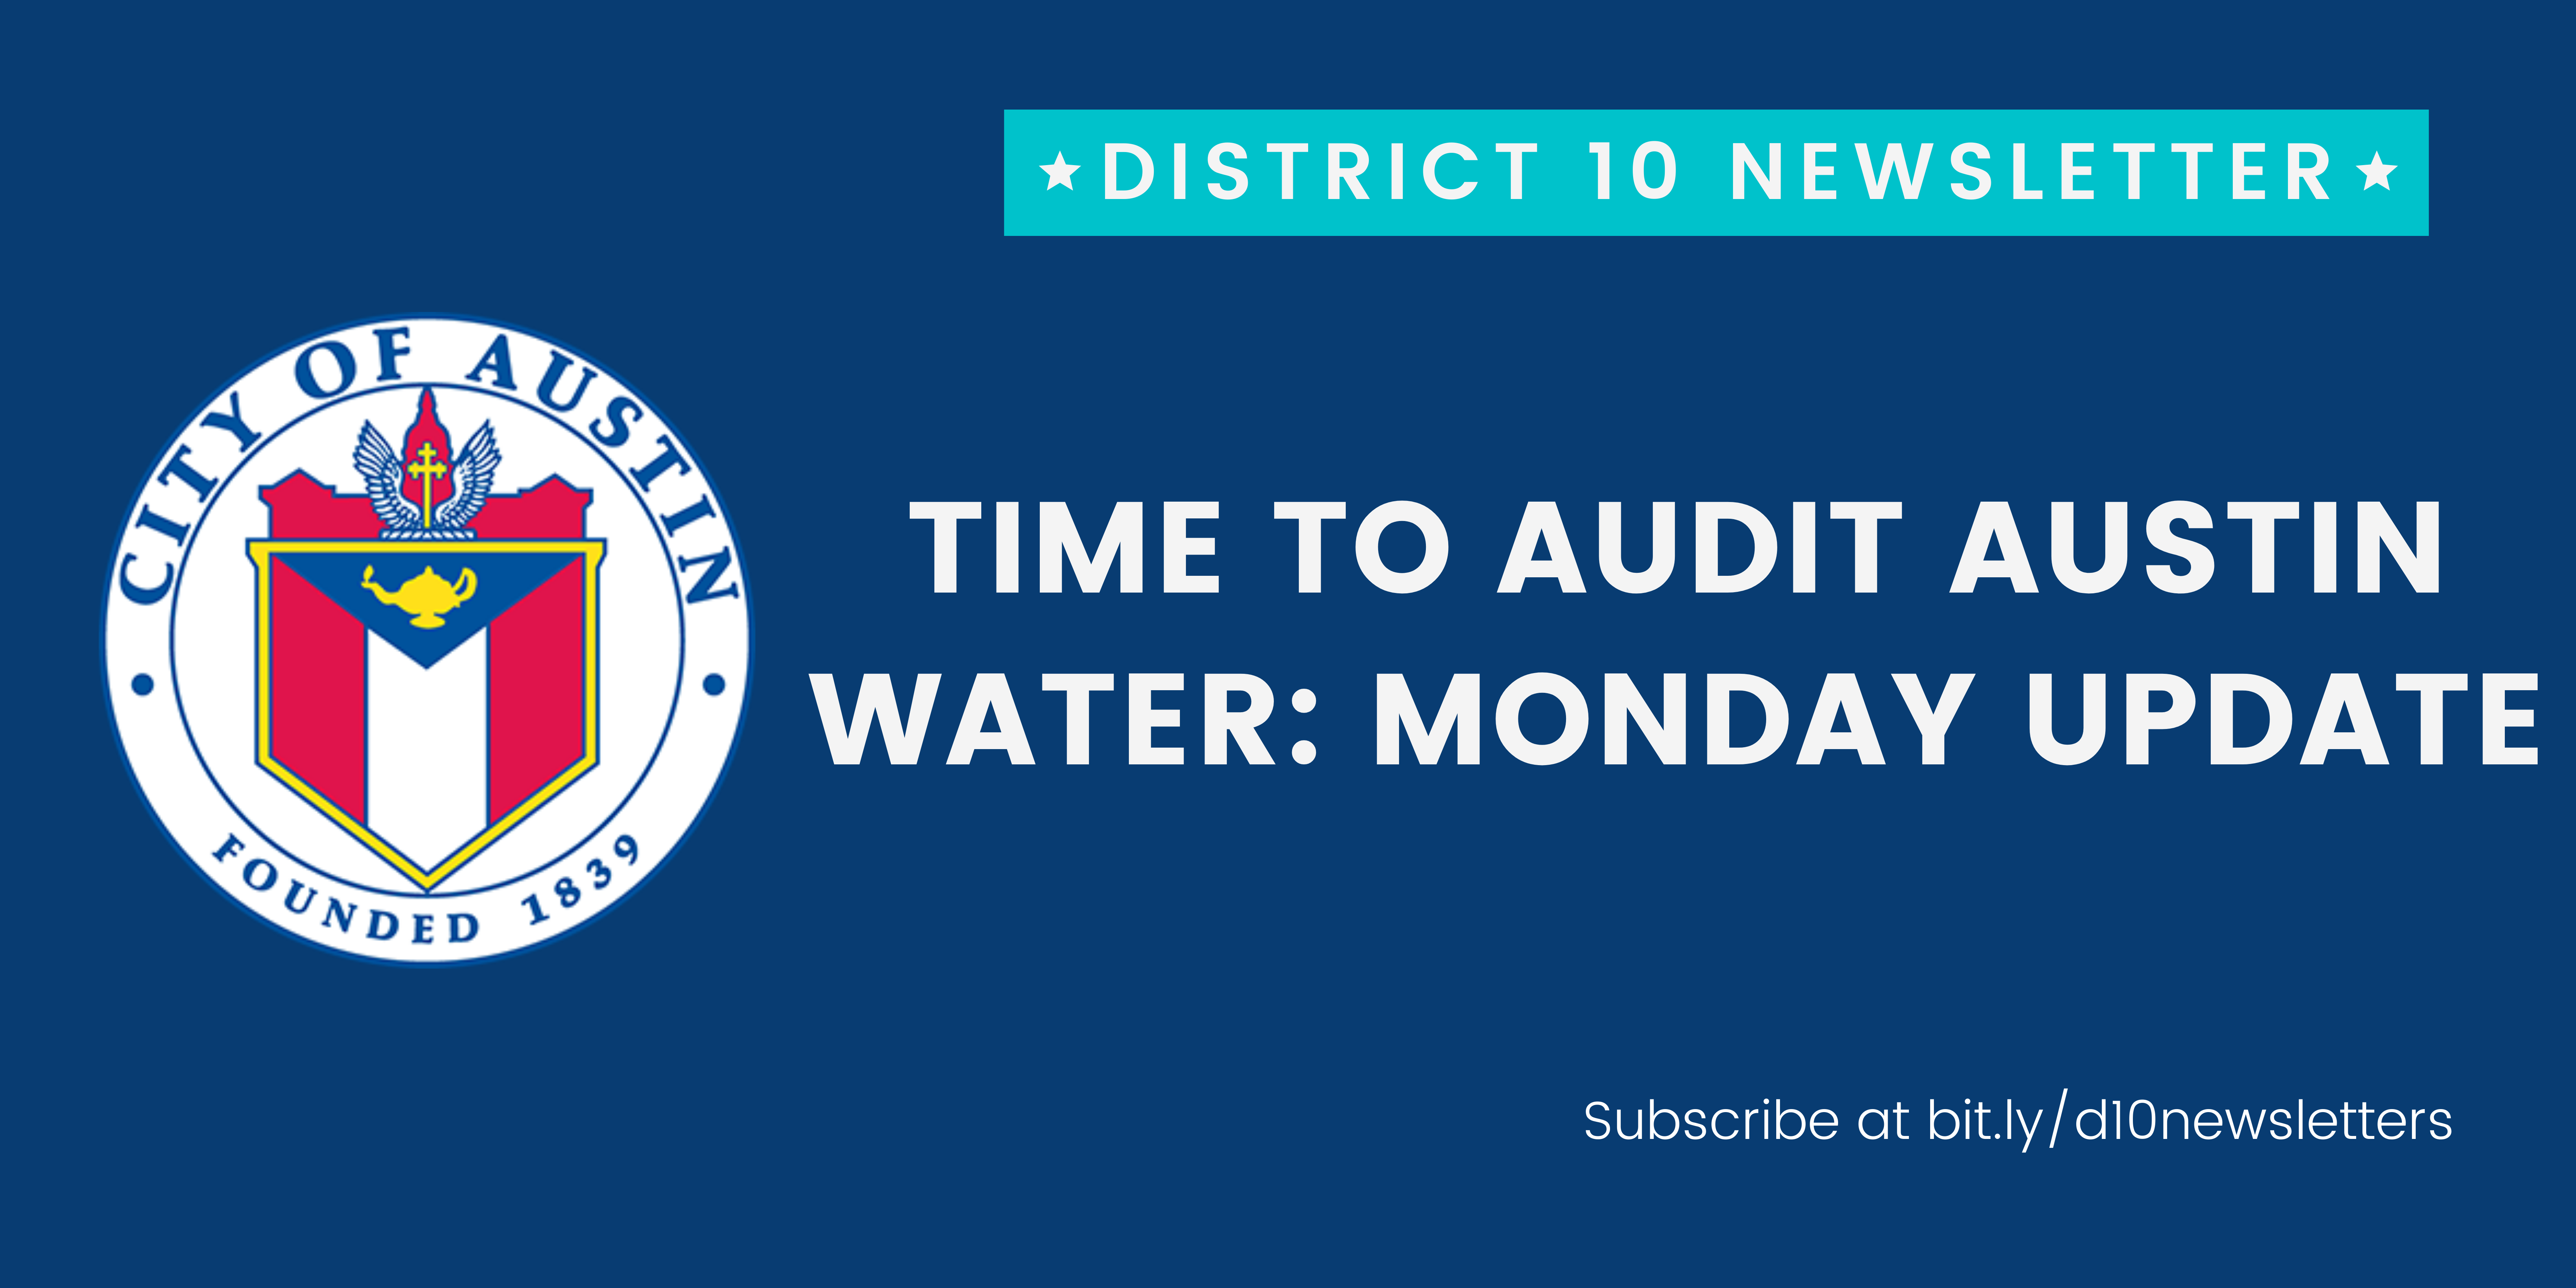 time to audit austin water: monday update